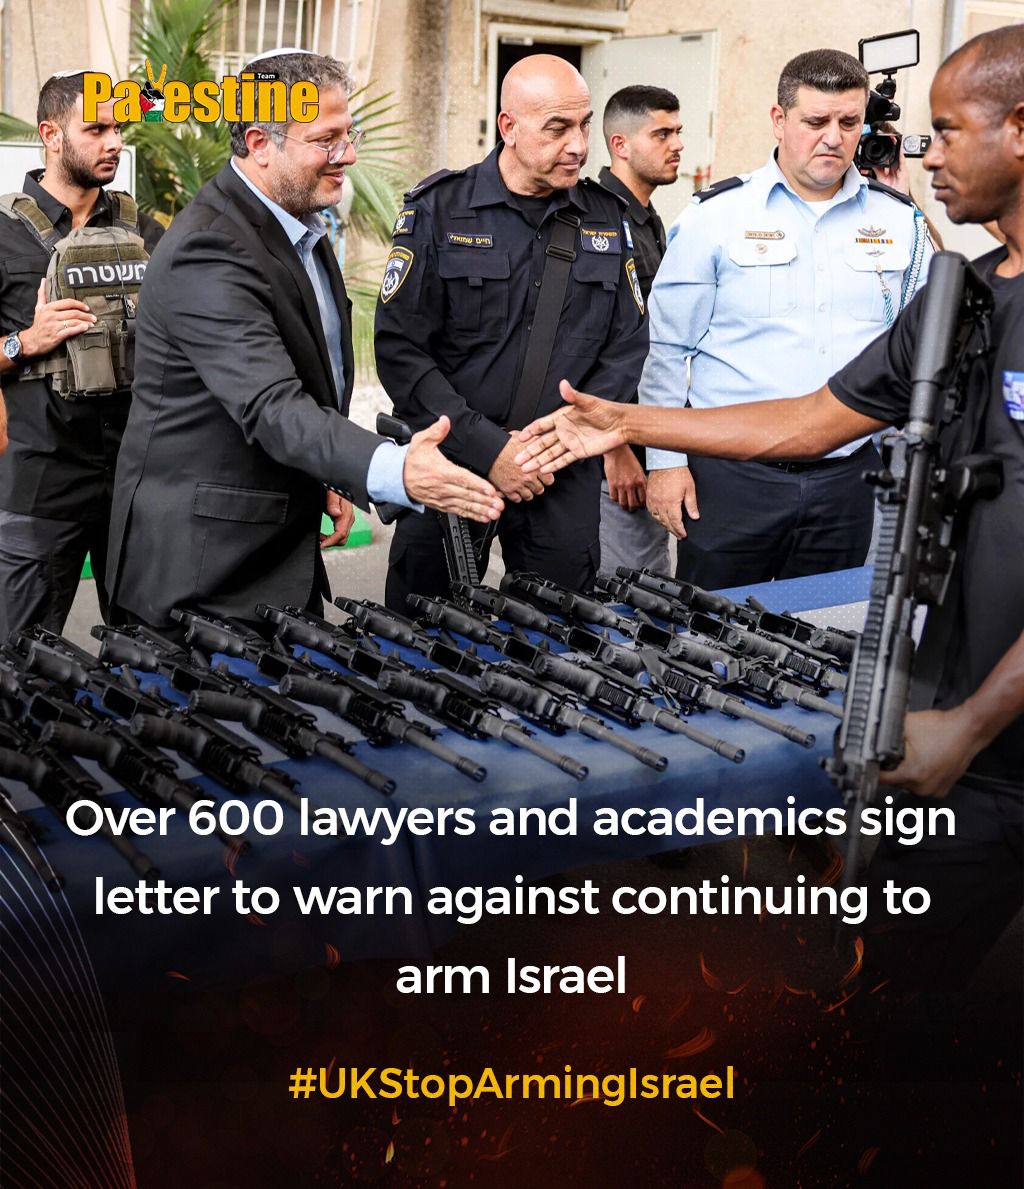 More than 600 lawyers, academics and three former judges of the UK Supreme Court have warned that “Britain is violating international law by continuing to arm Israel.” #UKStopArmingIsrael